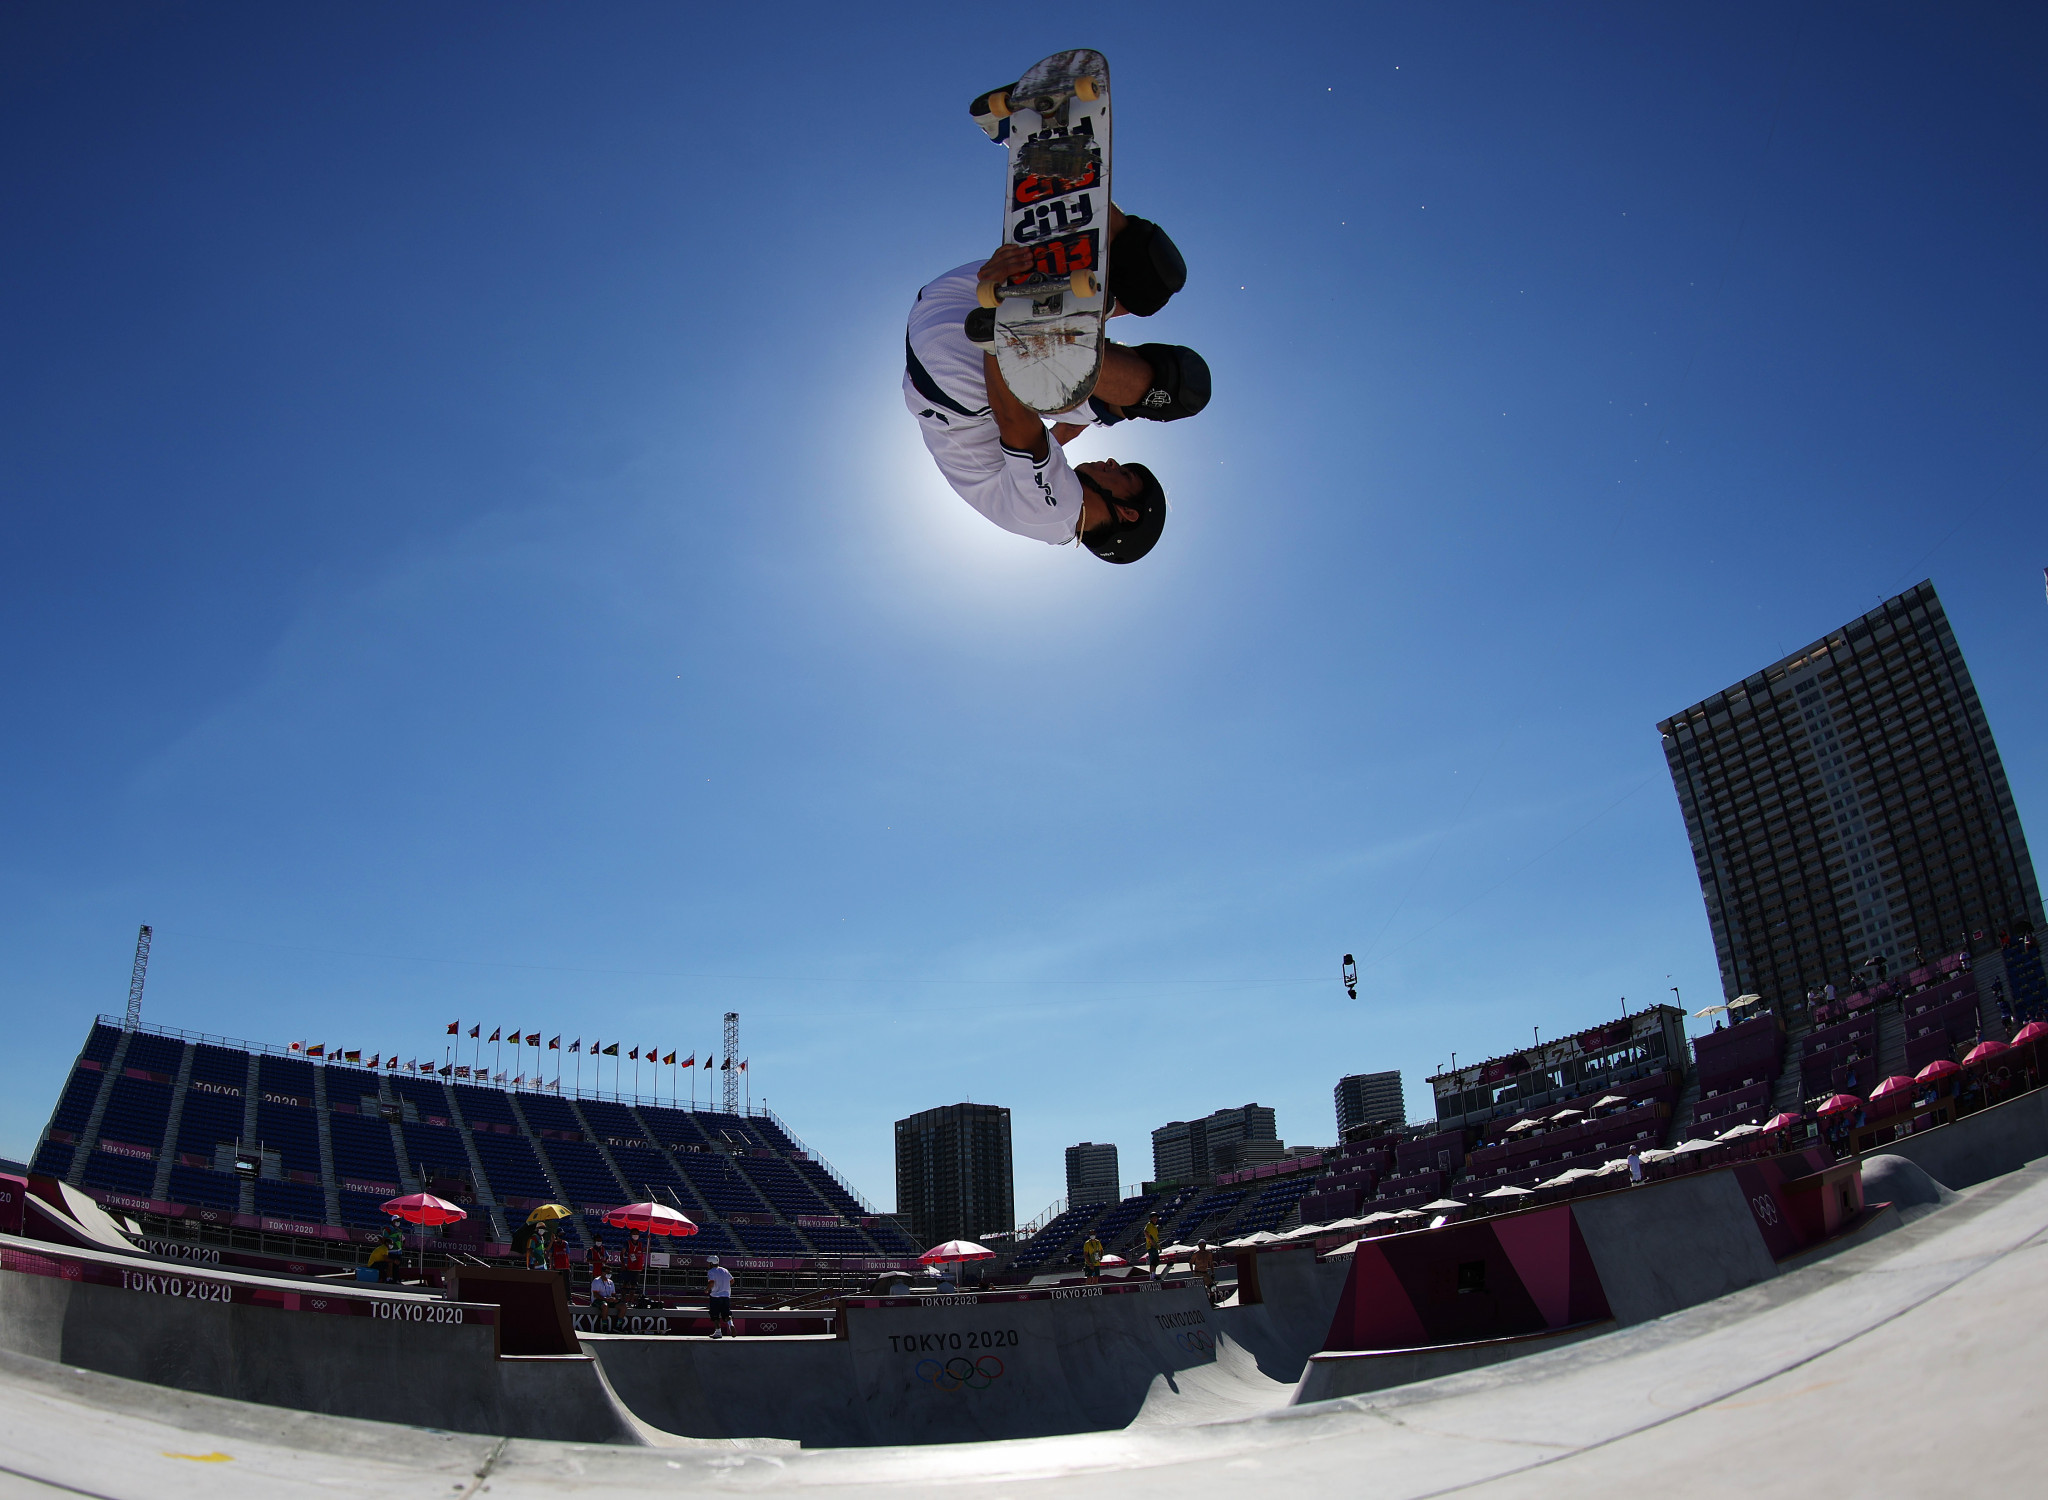 Street skateboarding qualifying finished today in Rome ©Getty Images